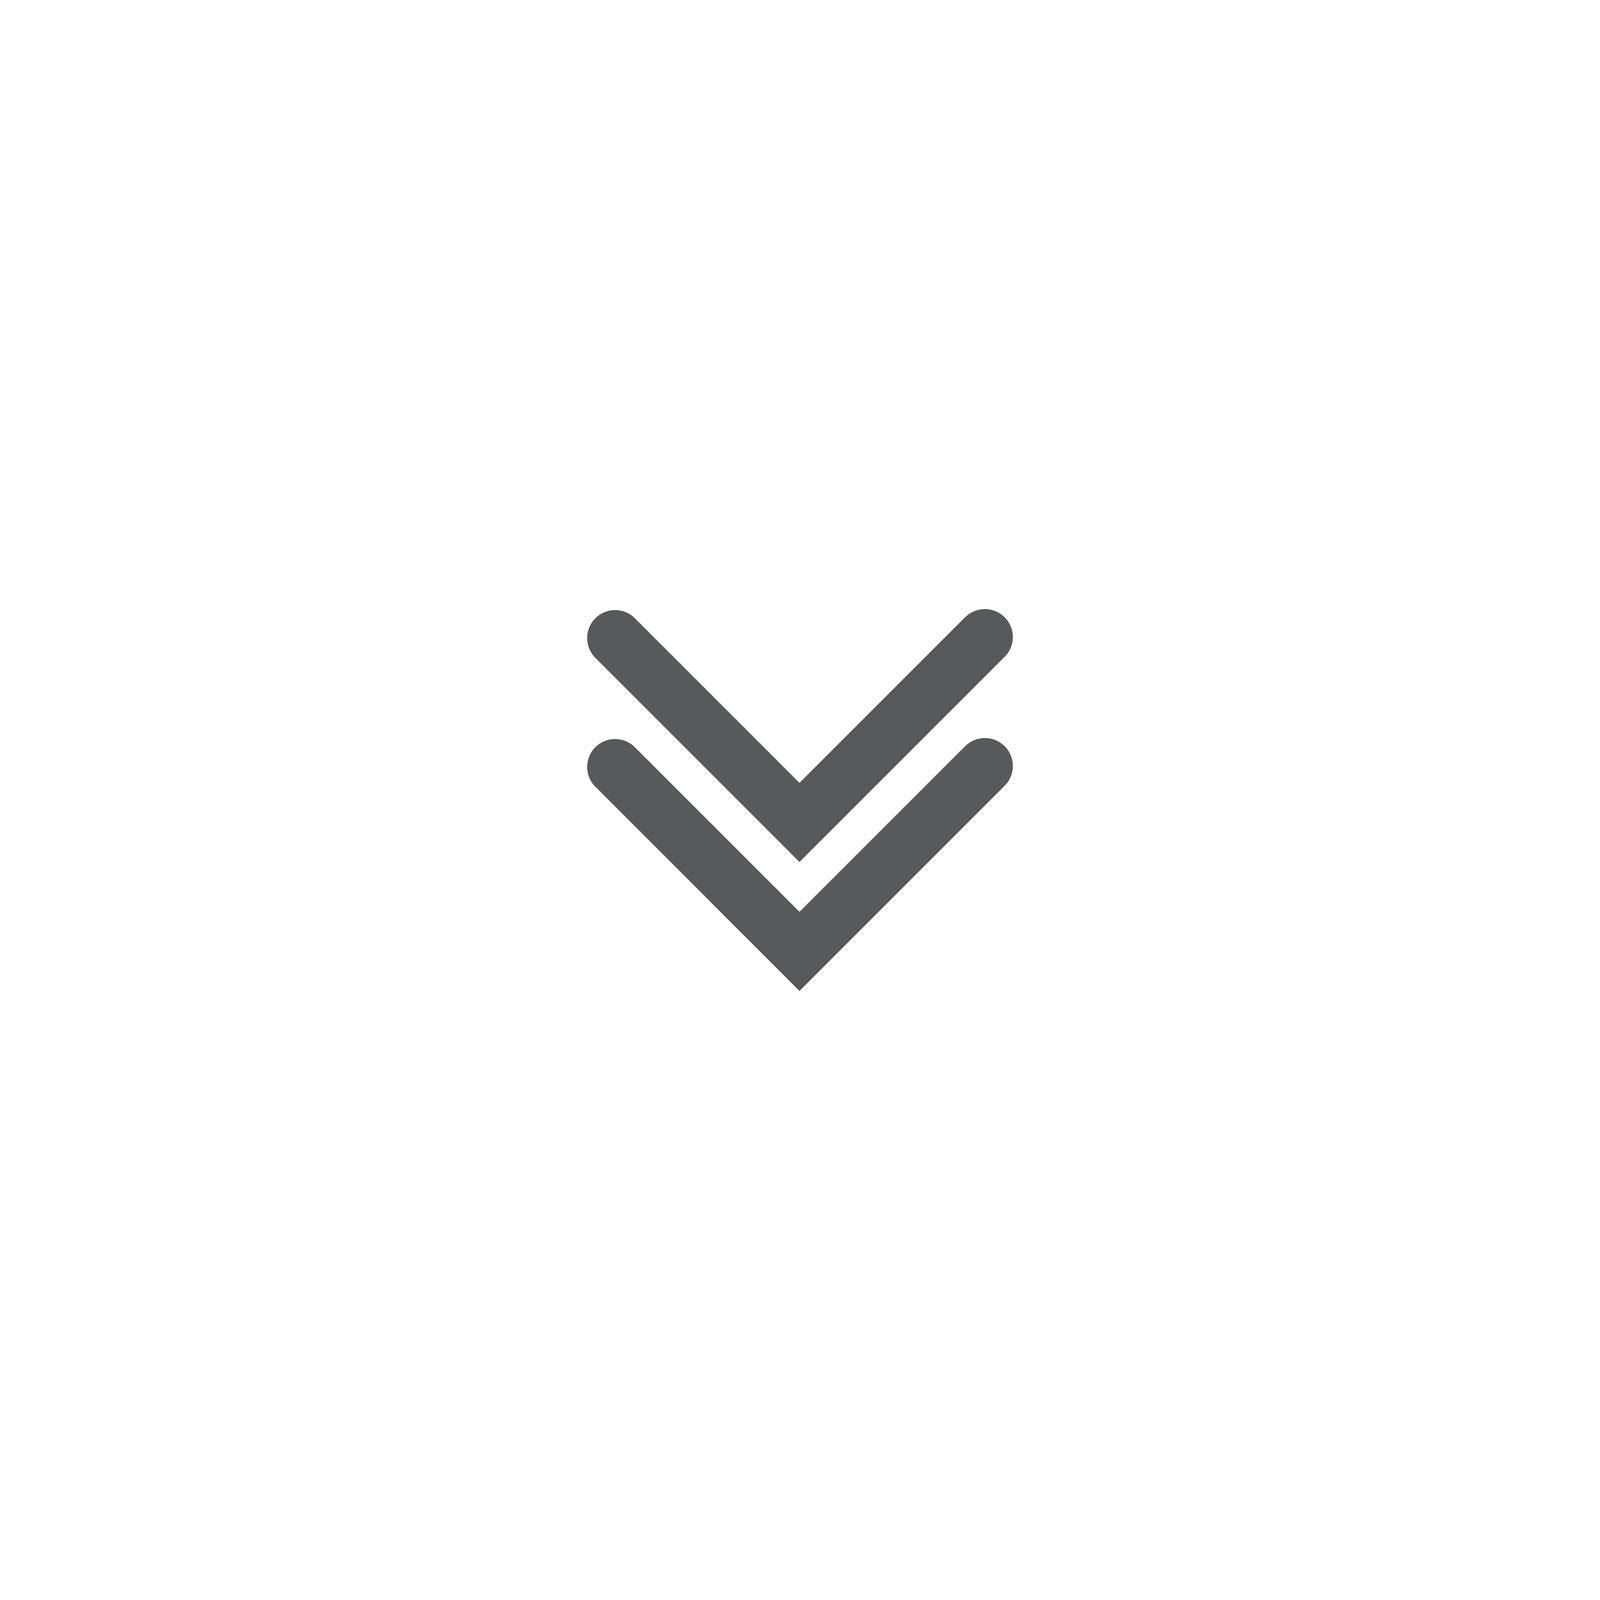 Scroll Down Icon - Vector, Sign and Symbol for Design, Website or Apps Elements.